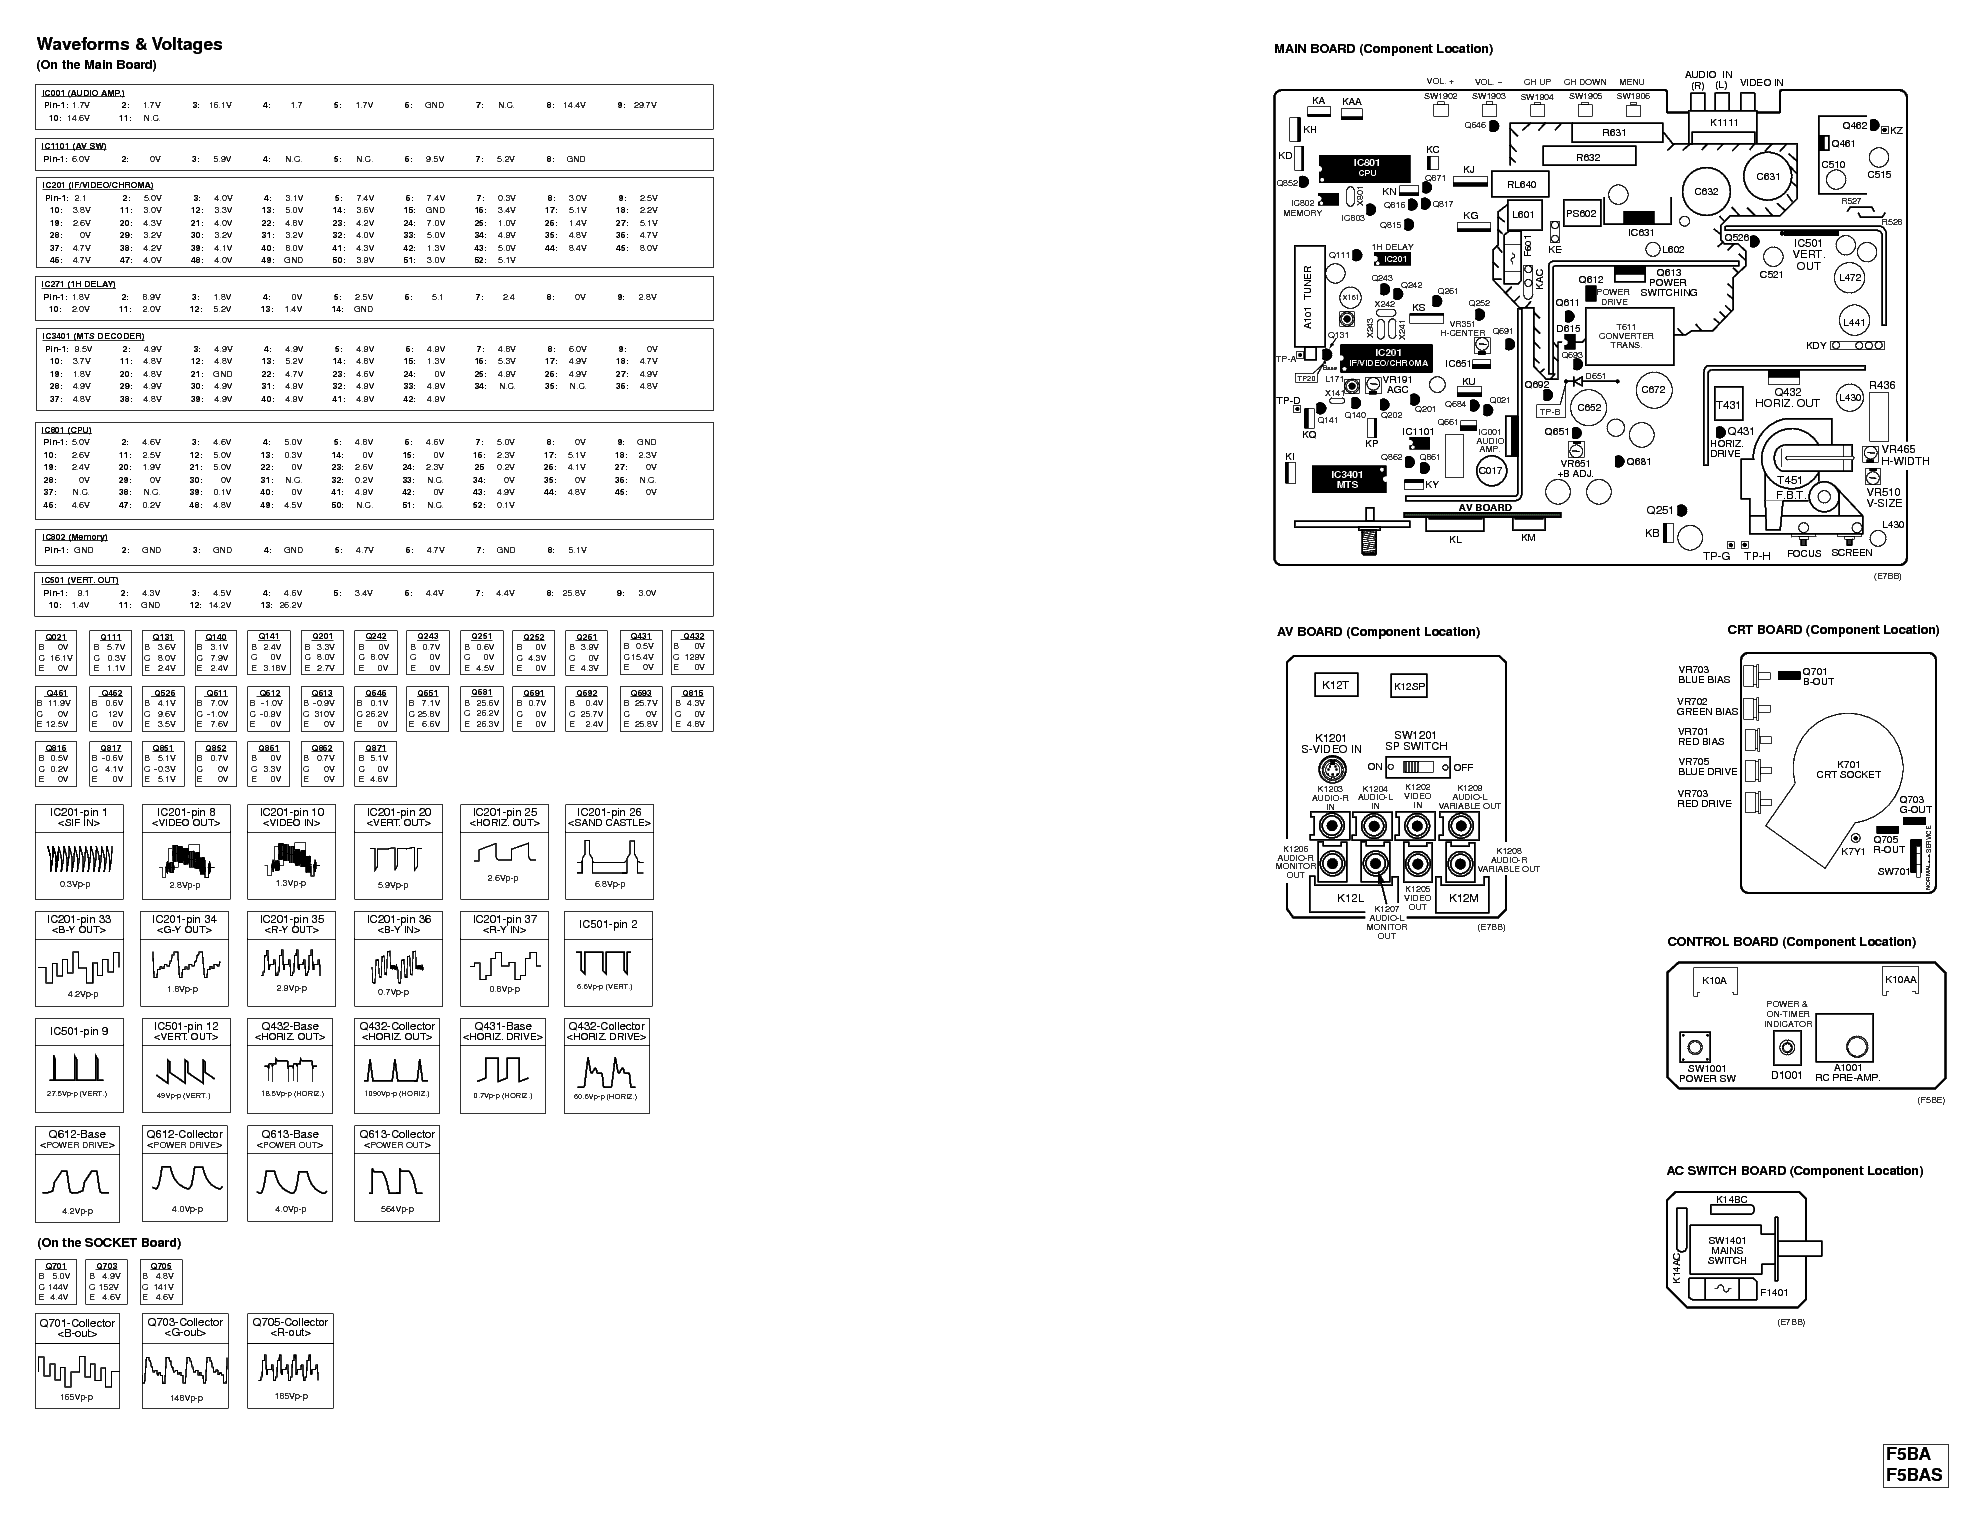 SANYO CHASSIS LB 1A SCH service manual (2nd page)